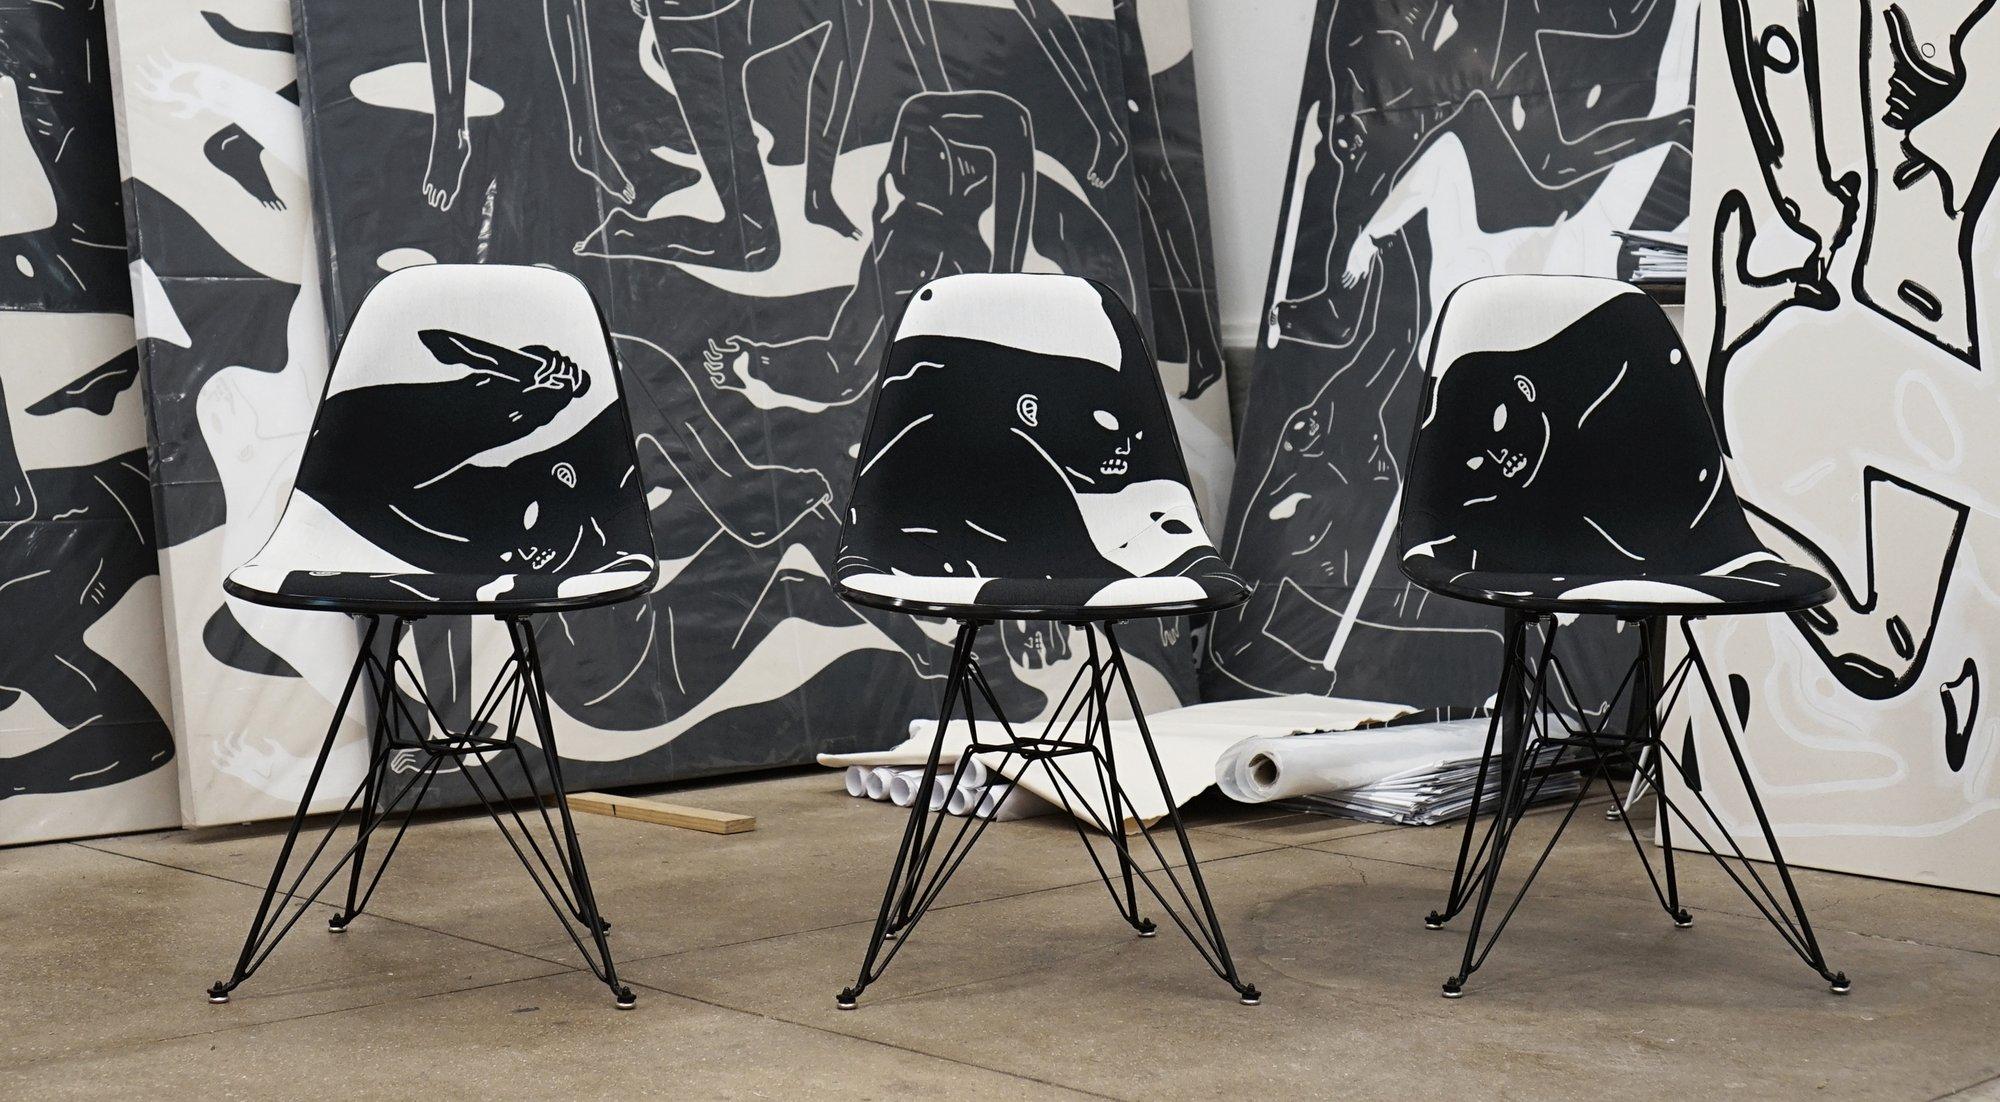 Introducing the ultimate fusion of art and function with the Cleon Peterson X Museum of Contemporary Art Denver X Modernica Case Study Chairs. These three chairs are a limited edition collaboration between renowned artist Cleon Peterson, The Museum